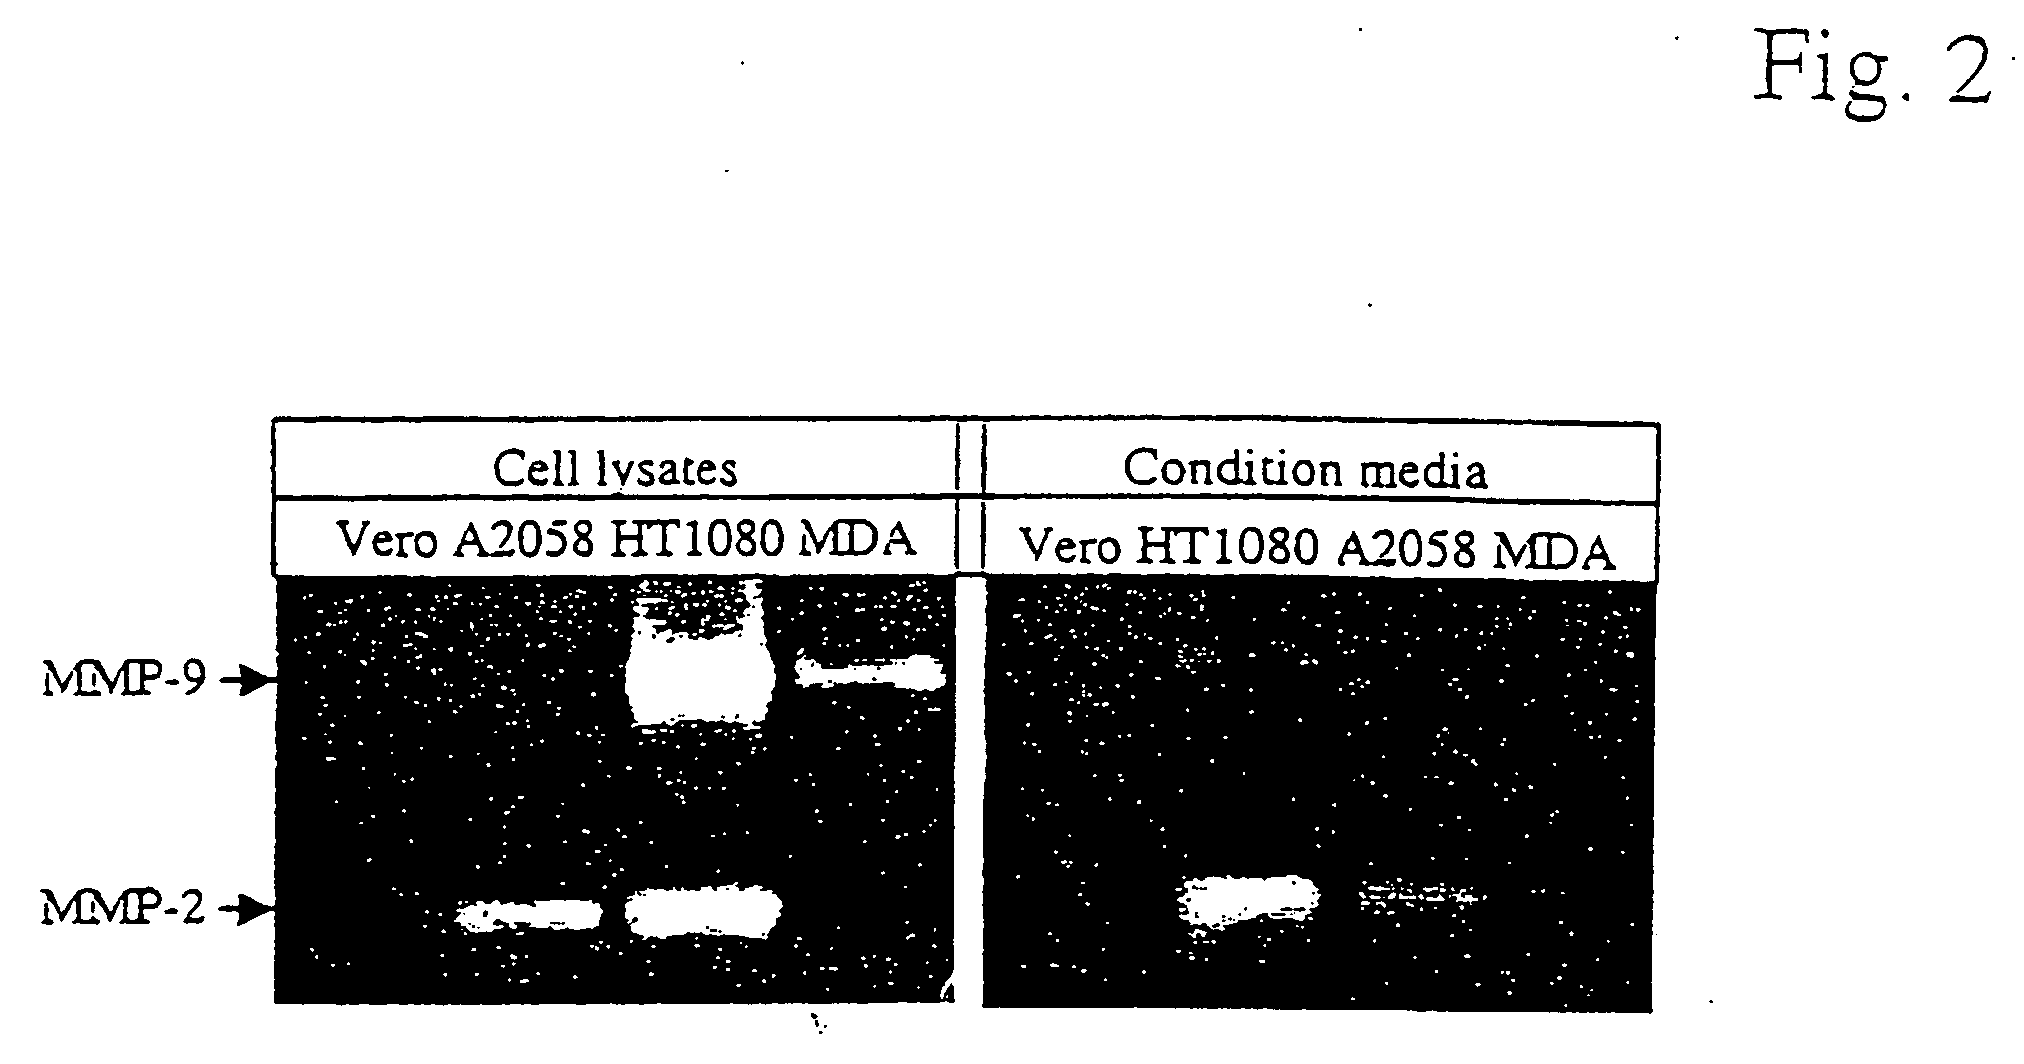 Mutated anthrax toxin protective antigen proteins that specifically target cells containing high amounts of cell-surface metalloproteinases or plasminogen activator receptors